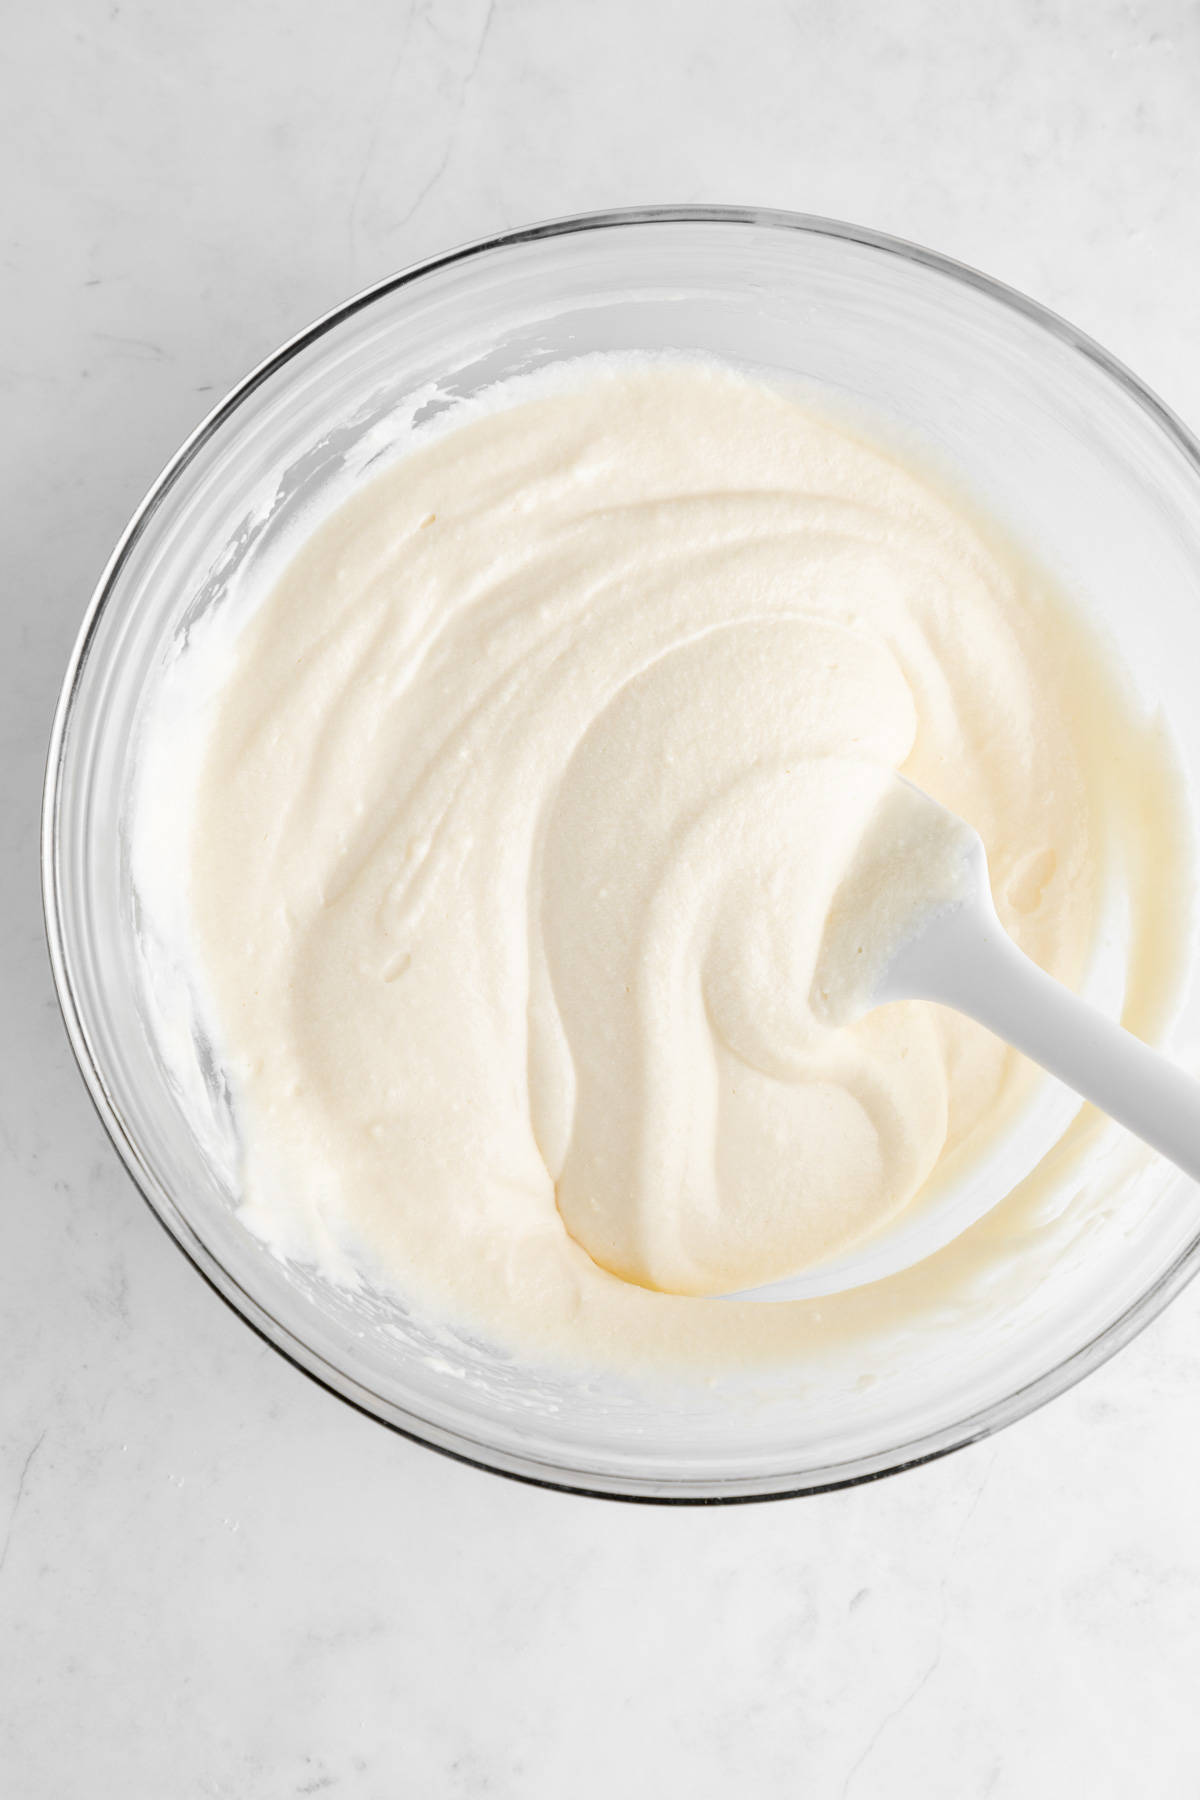 a silicone spatula mixing vegan cream cheese frosting in a glass mixing bowl